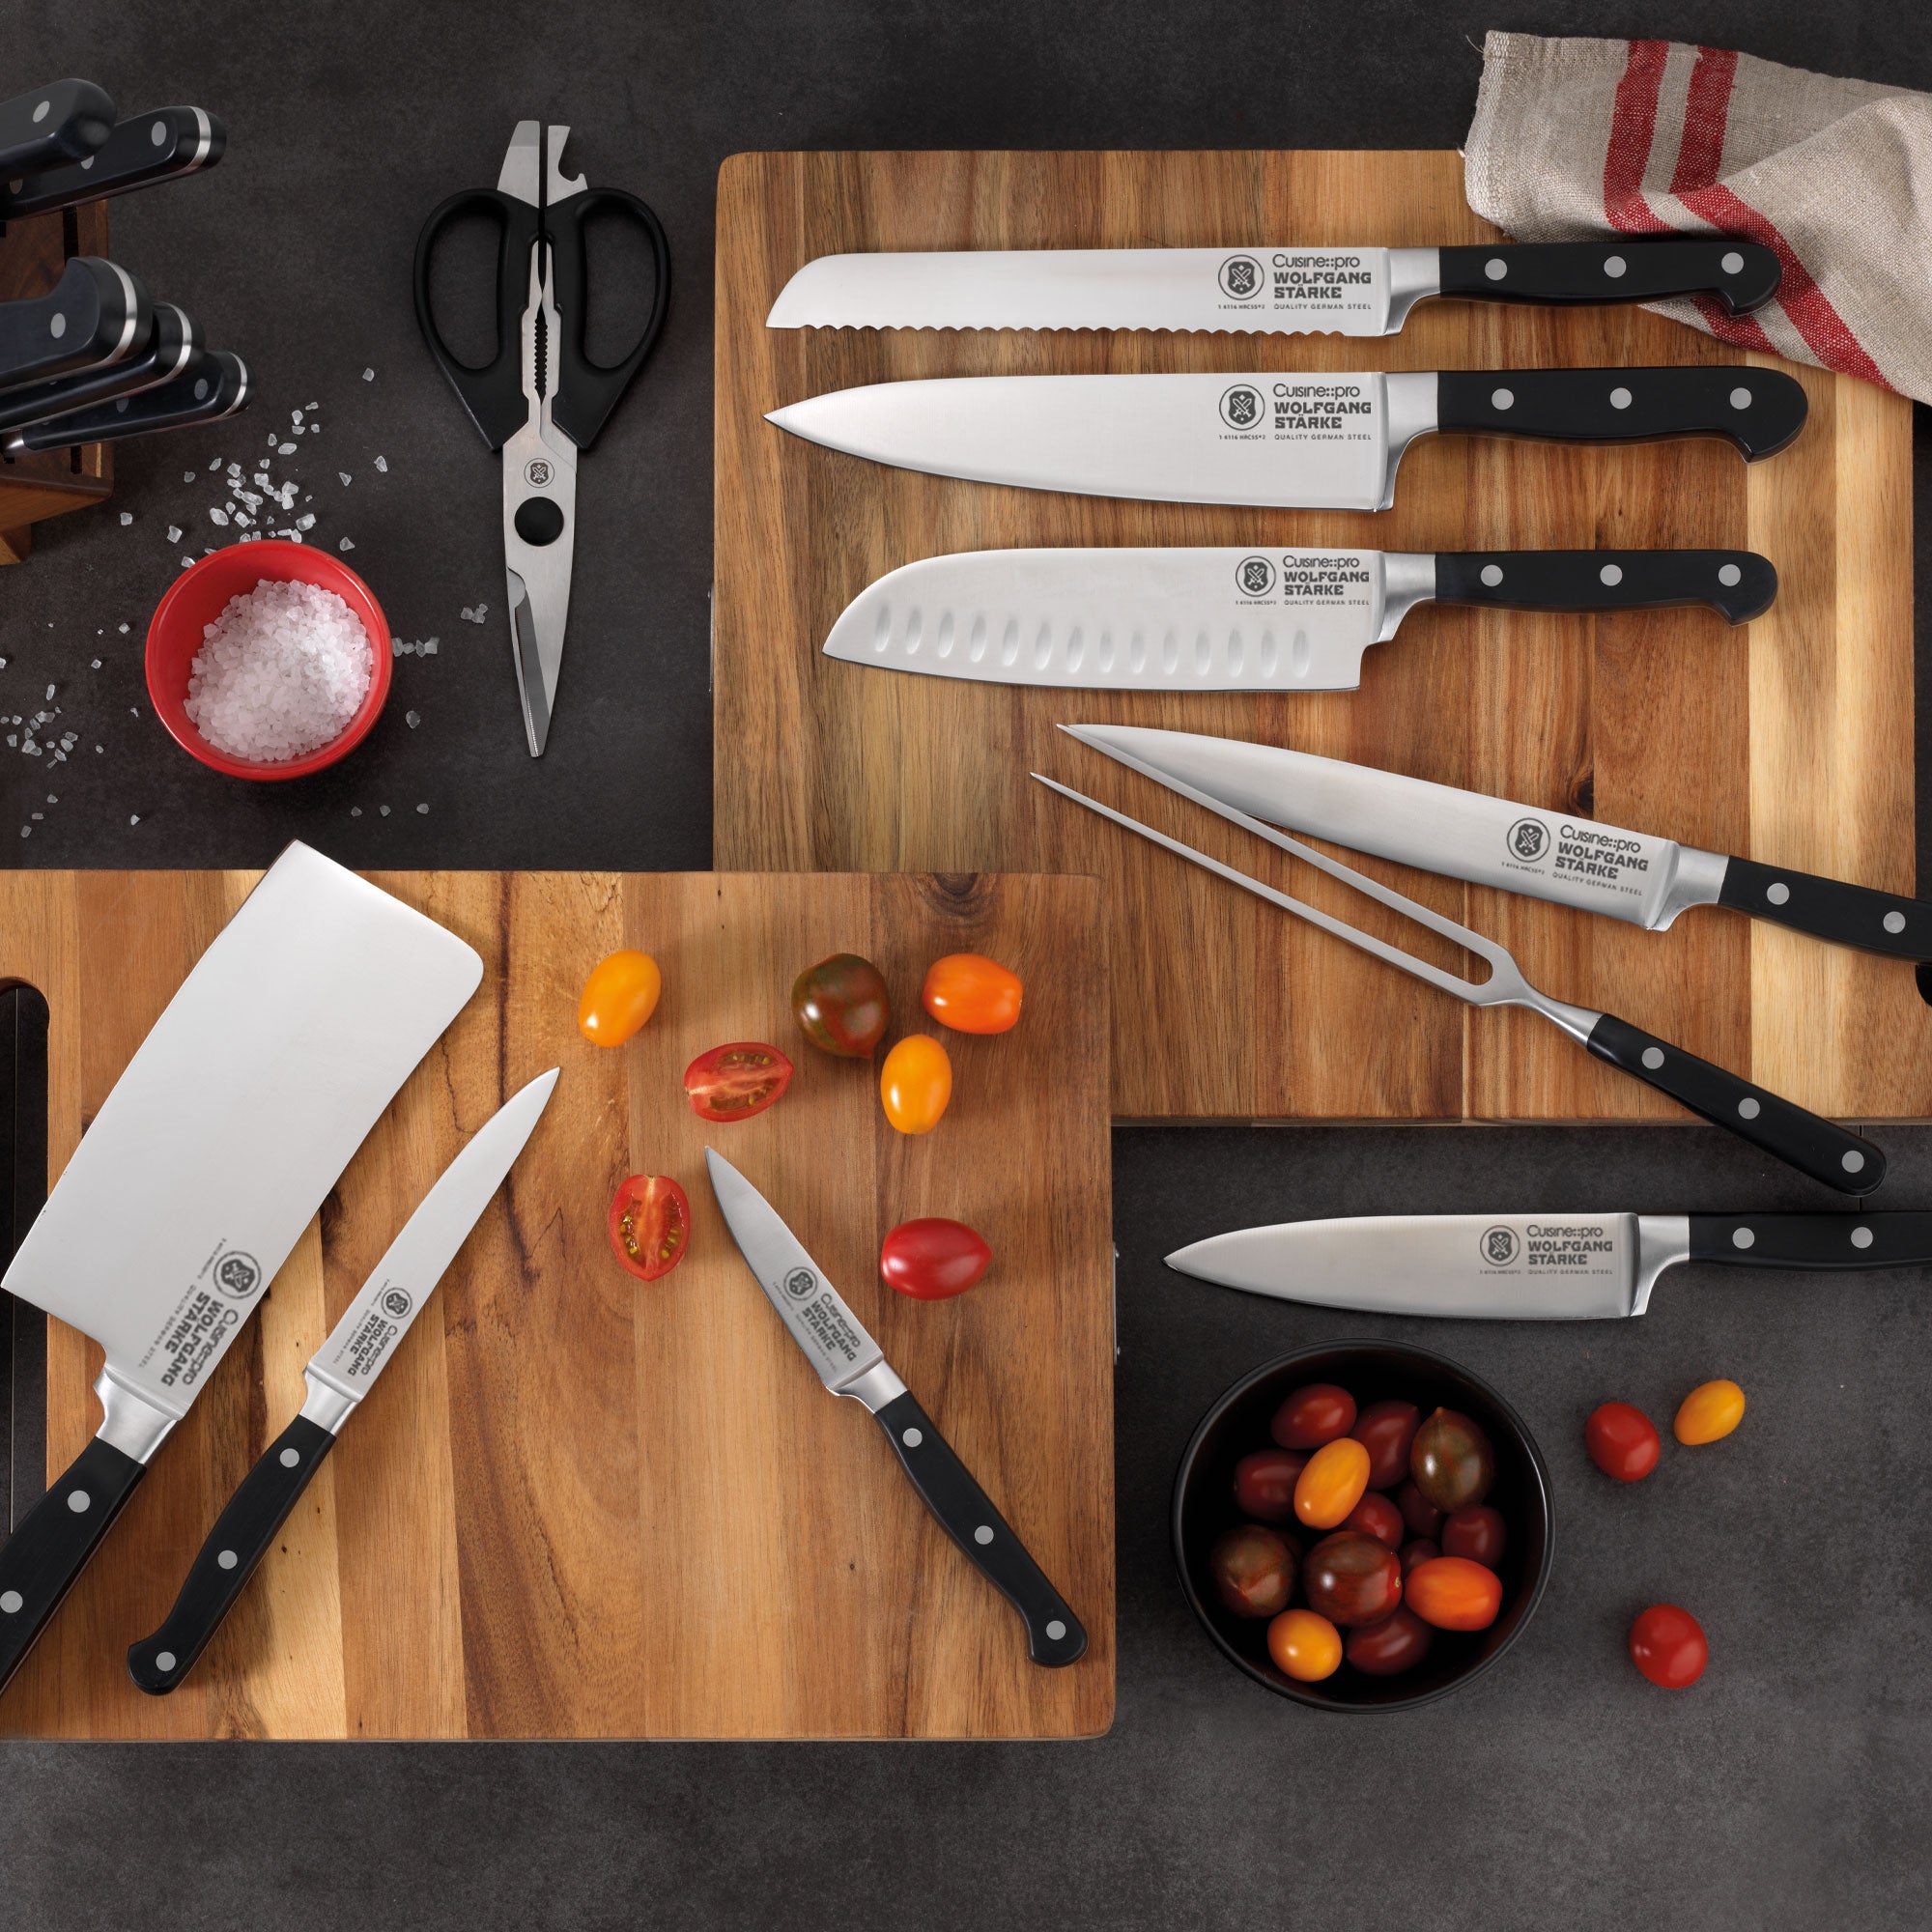 SABRE 9-Piece Stainless Steel Knife Set with Knife Block